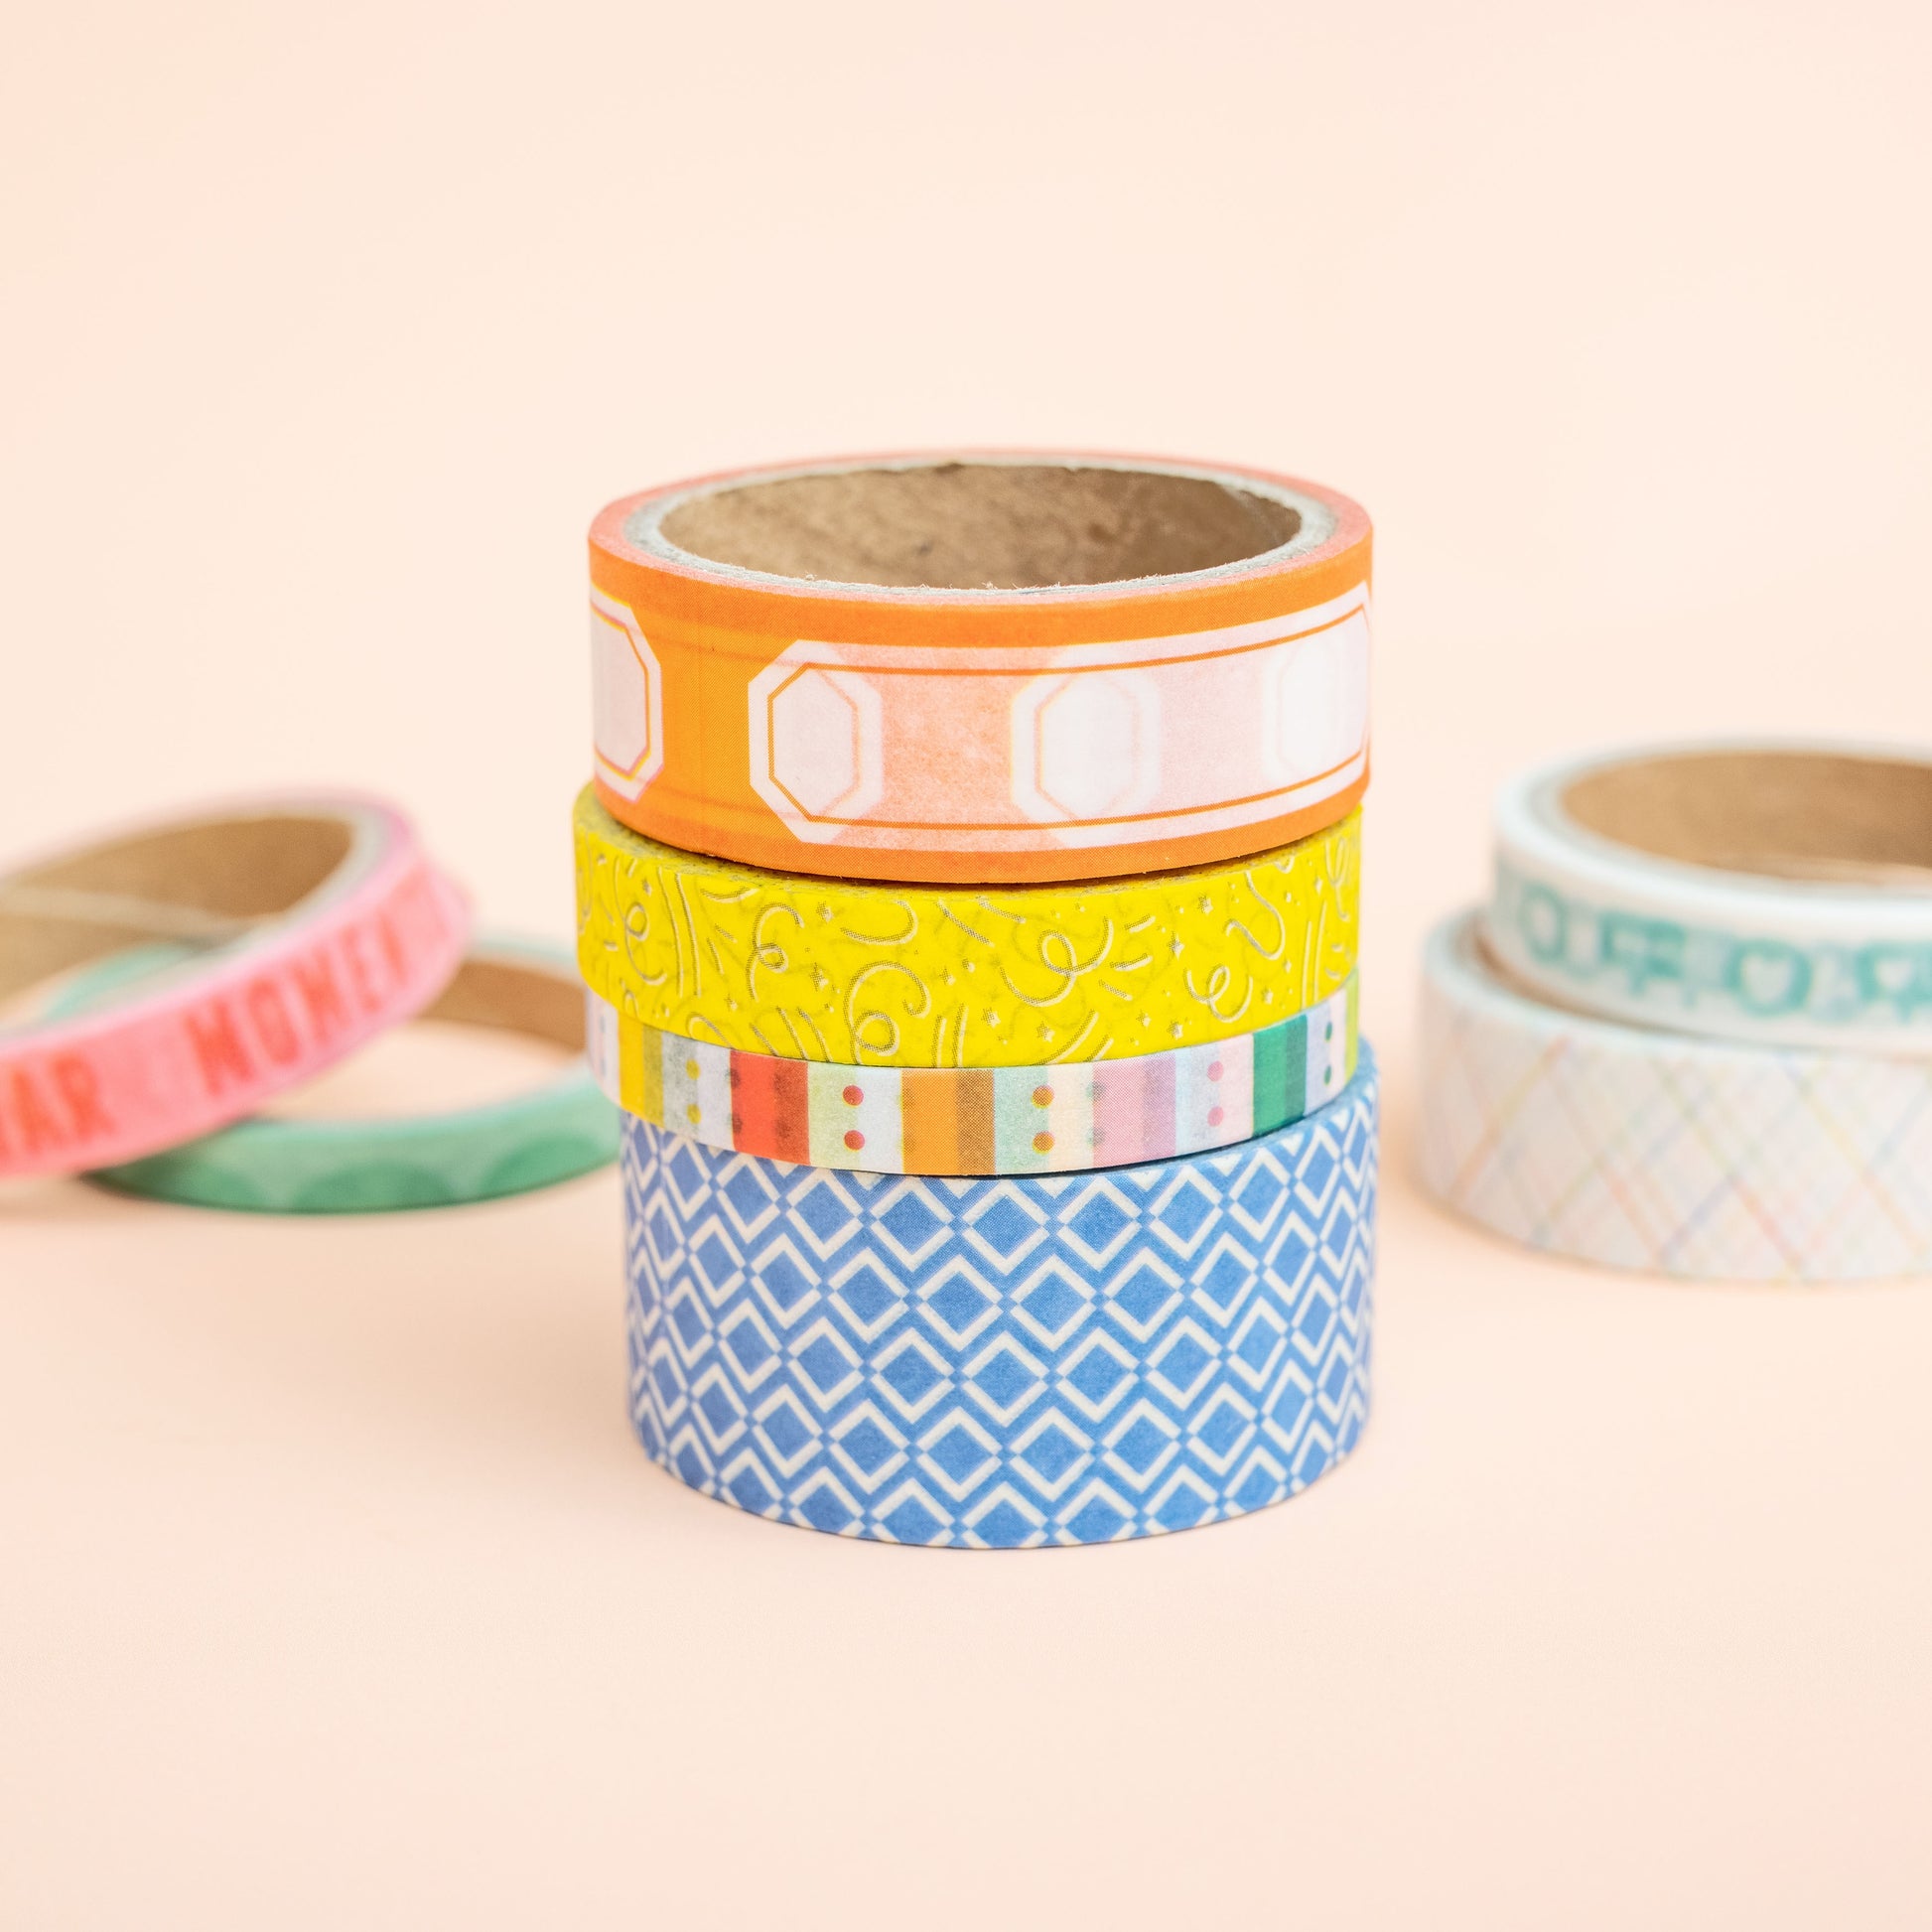 Gold Foil Washi Tape Collection: 8 sets to choose from